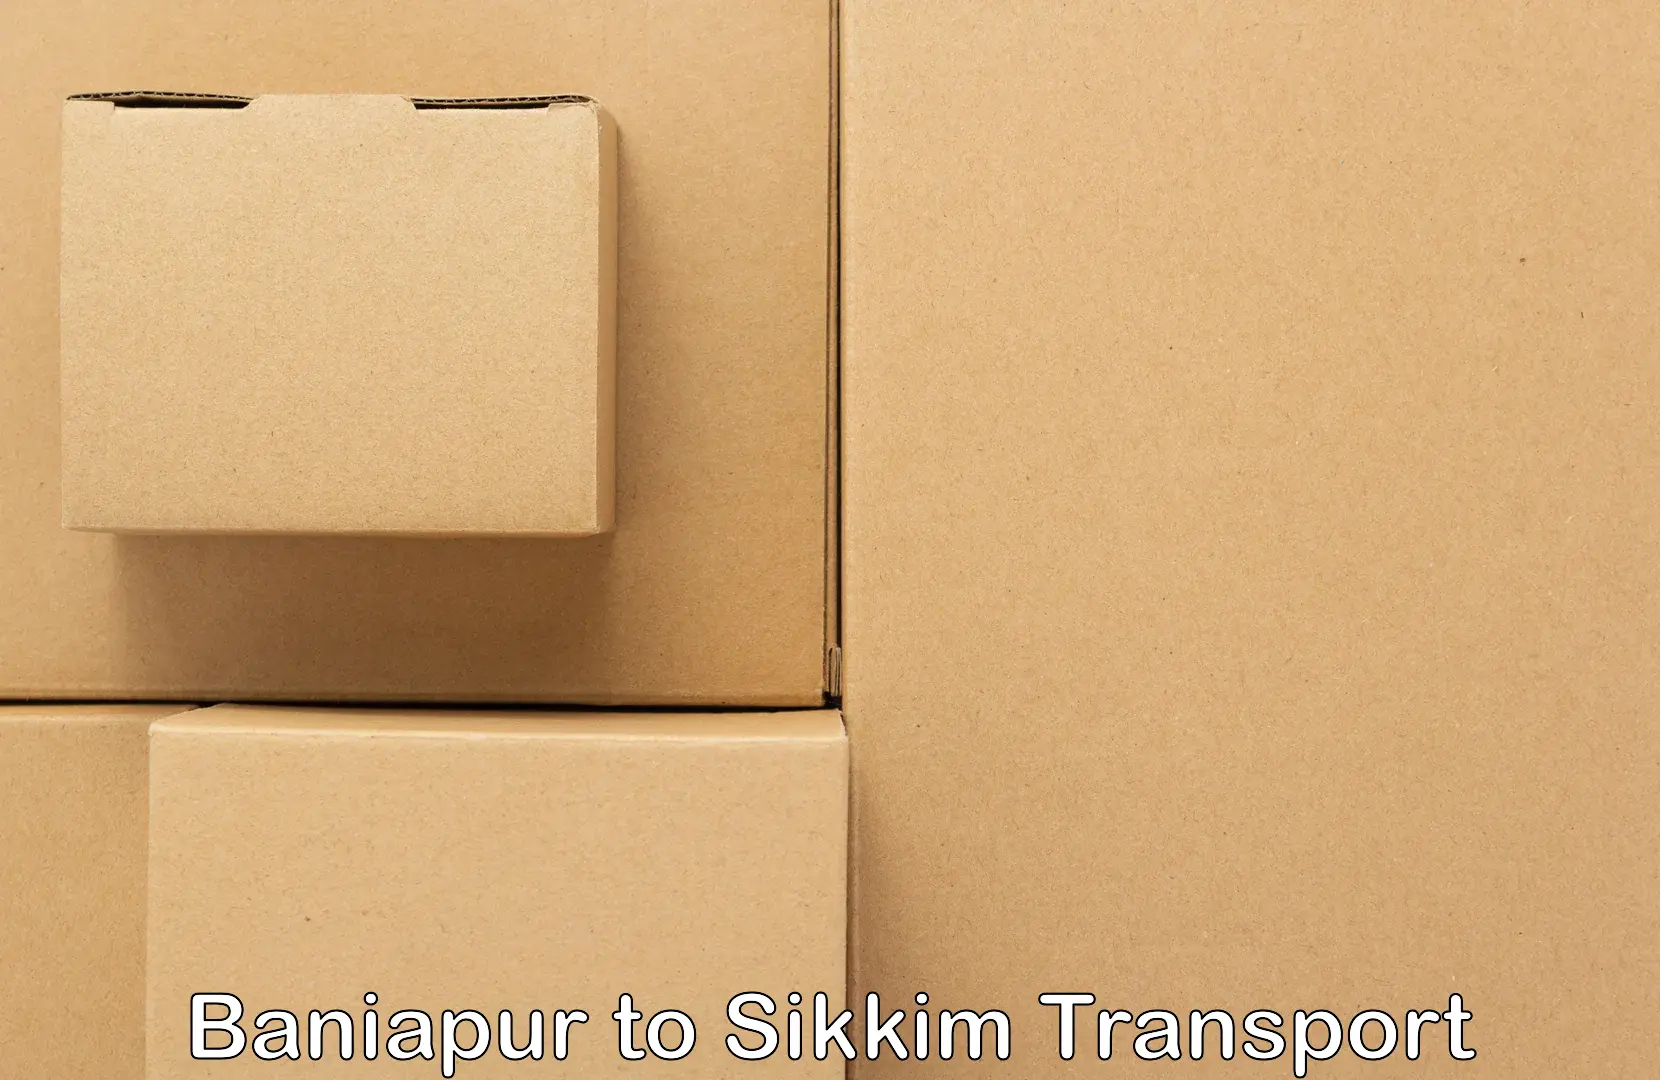 Delivery service Baniapur to Sikkim